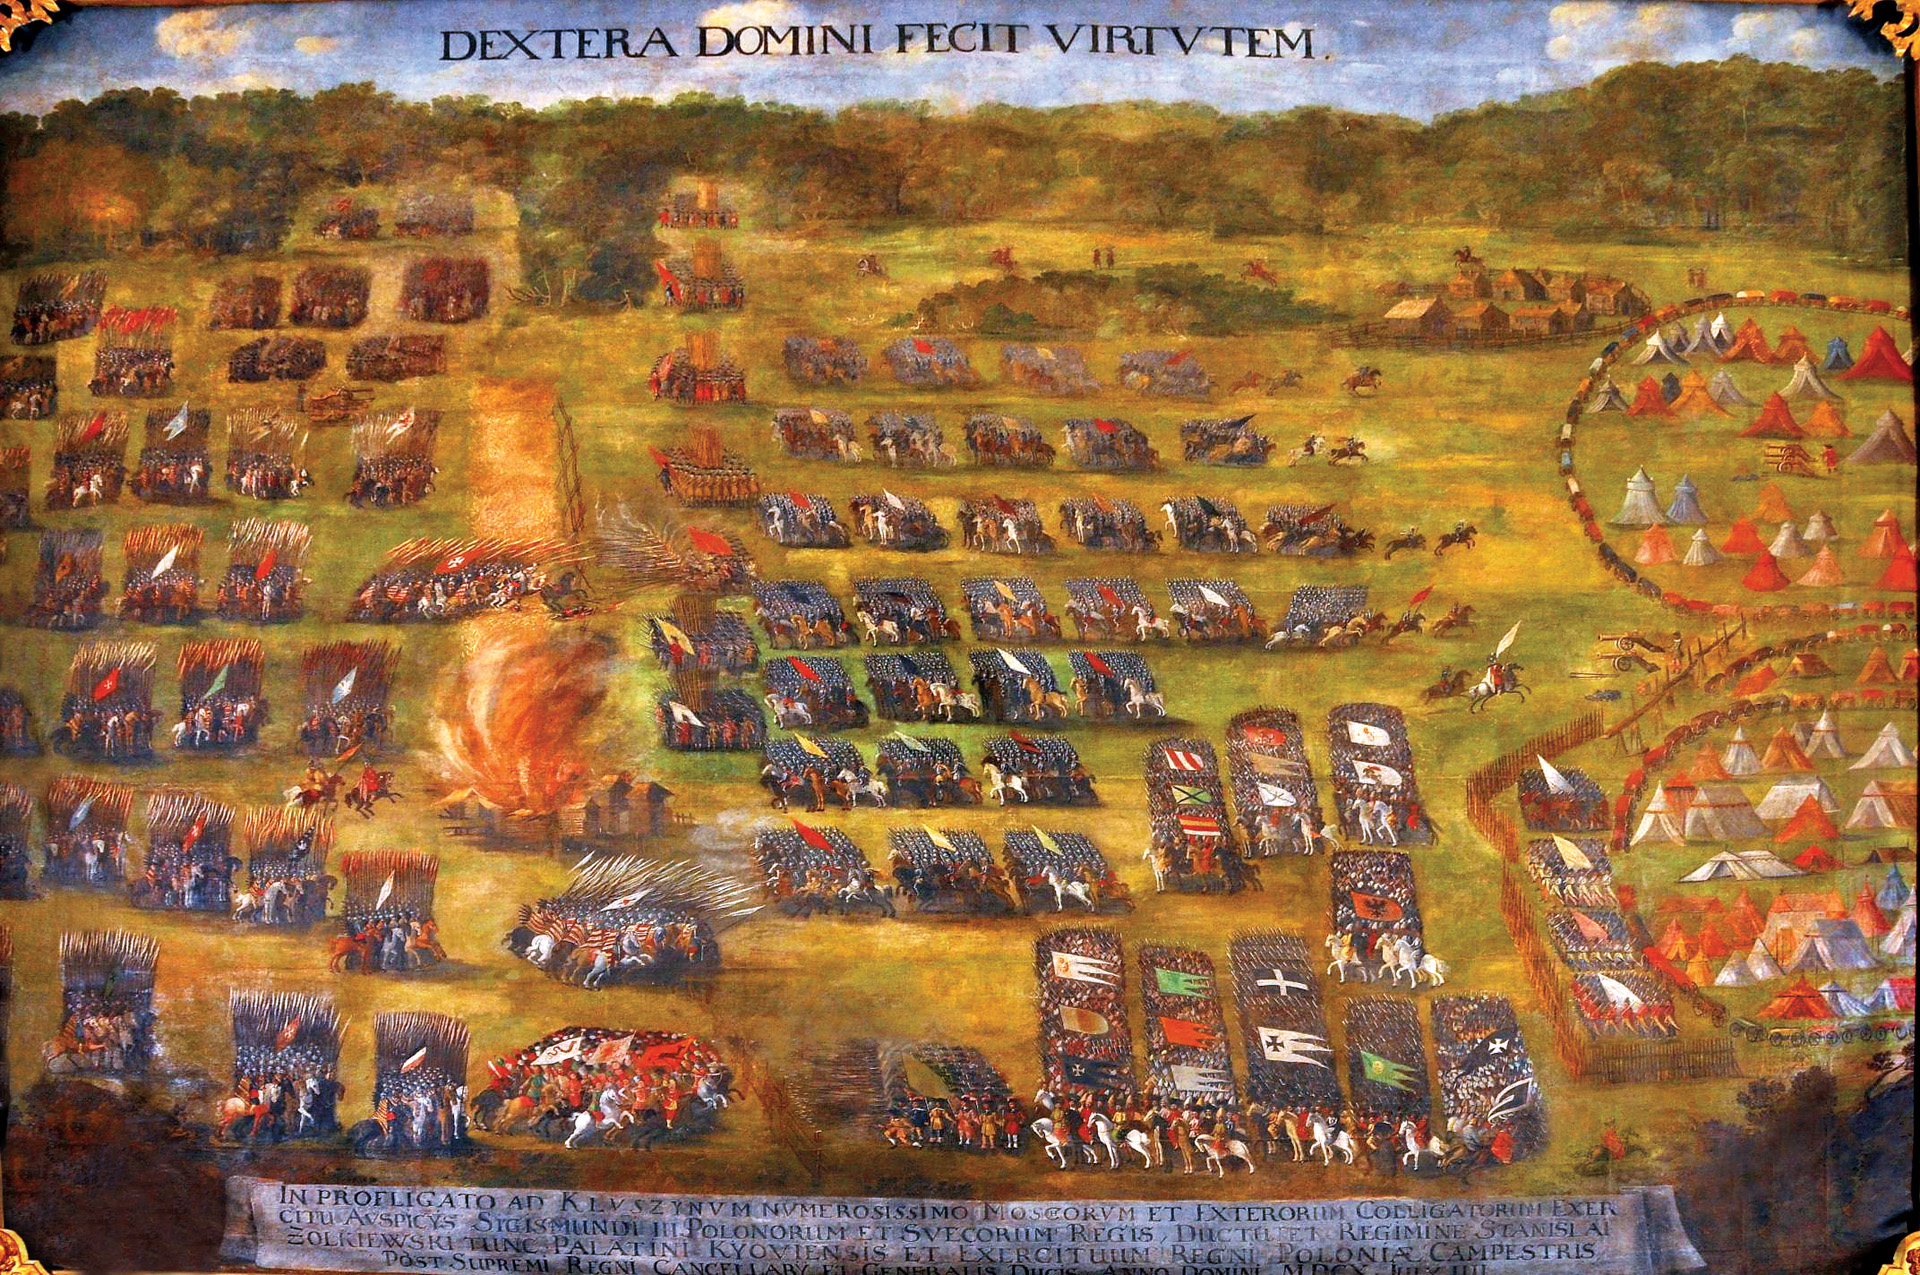 Hetman Stanisław Zółkiewski led a Polish-Lithuanian army to victory at Klushino in 1610. Despite being outnumbered five to one, Zółkiewski skillfully used his 5,000 Husaria to defeat the Russians.